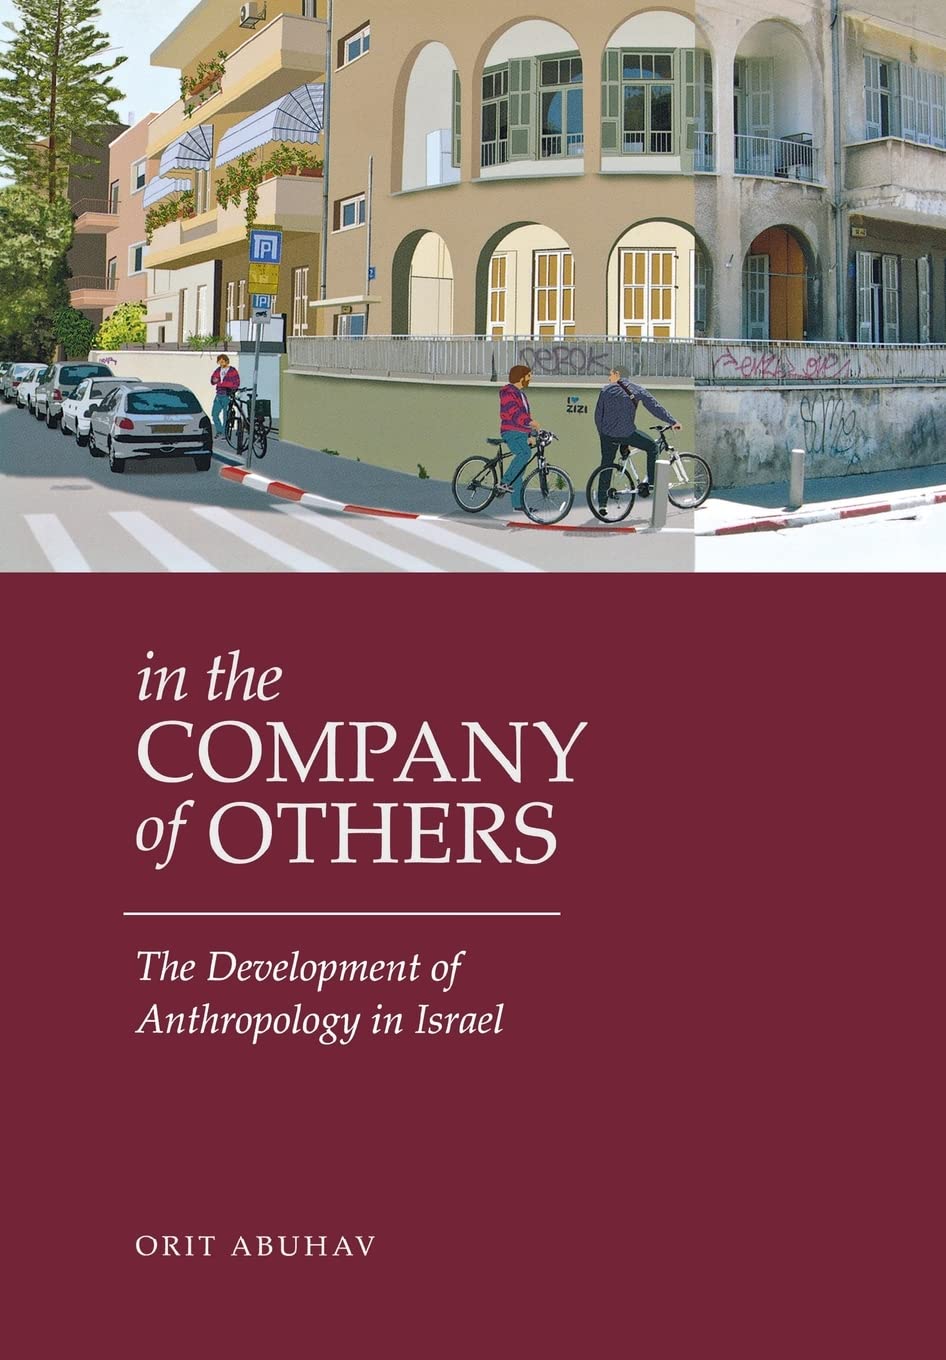 In the Company of Others: The Development of Anthropology in Israel ***